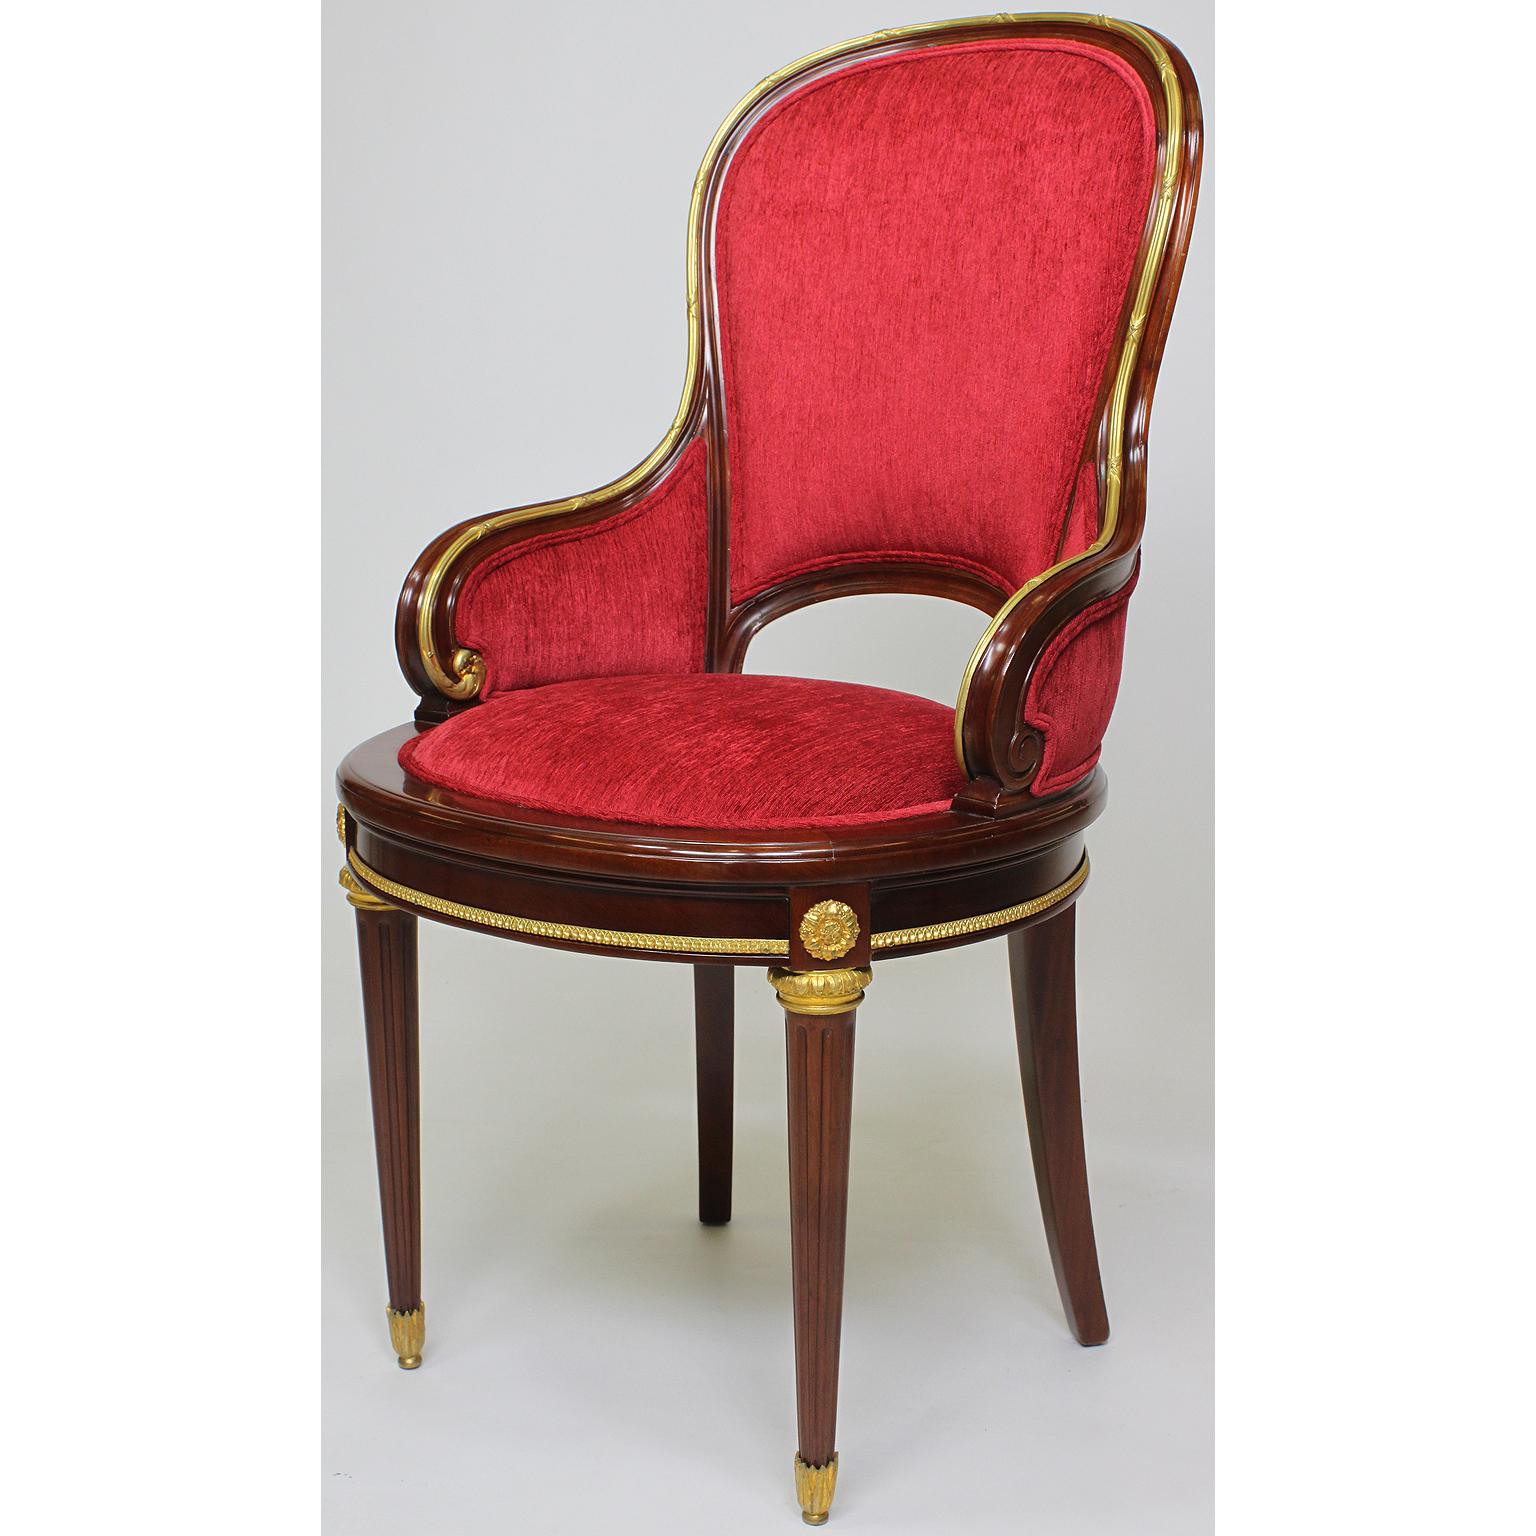 A very fine set of twelve French 19th-20th century Louis XVI style Belle Époque mahogany and ormolu-mounted dining chairs. The rounded and padded backrests and sides, surmounted with a banded gilt bronze trim and medallions, raised on fluted legs